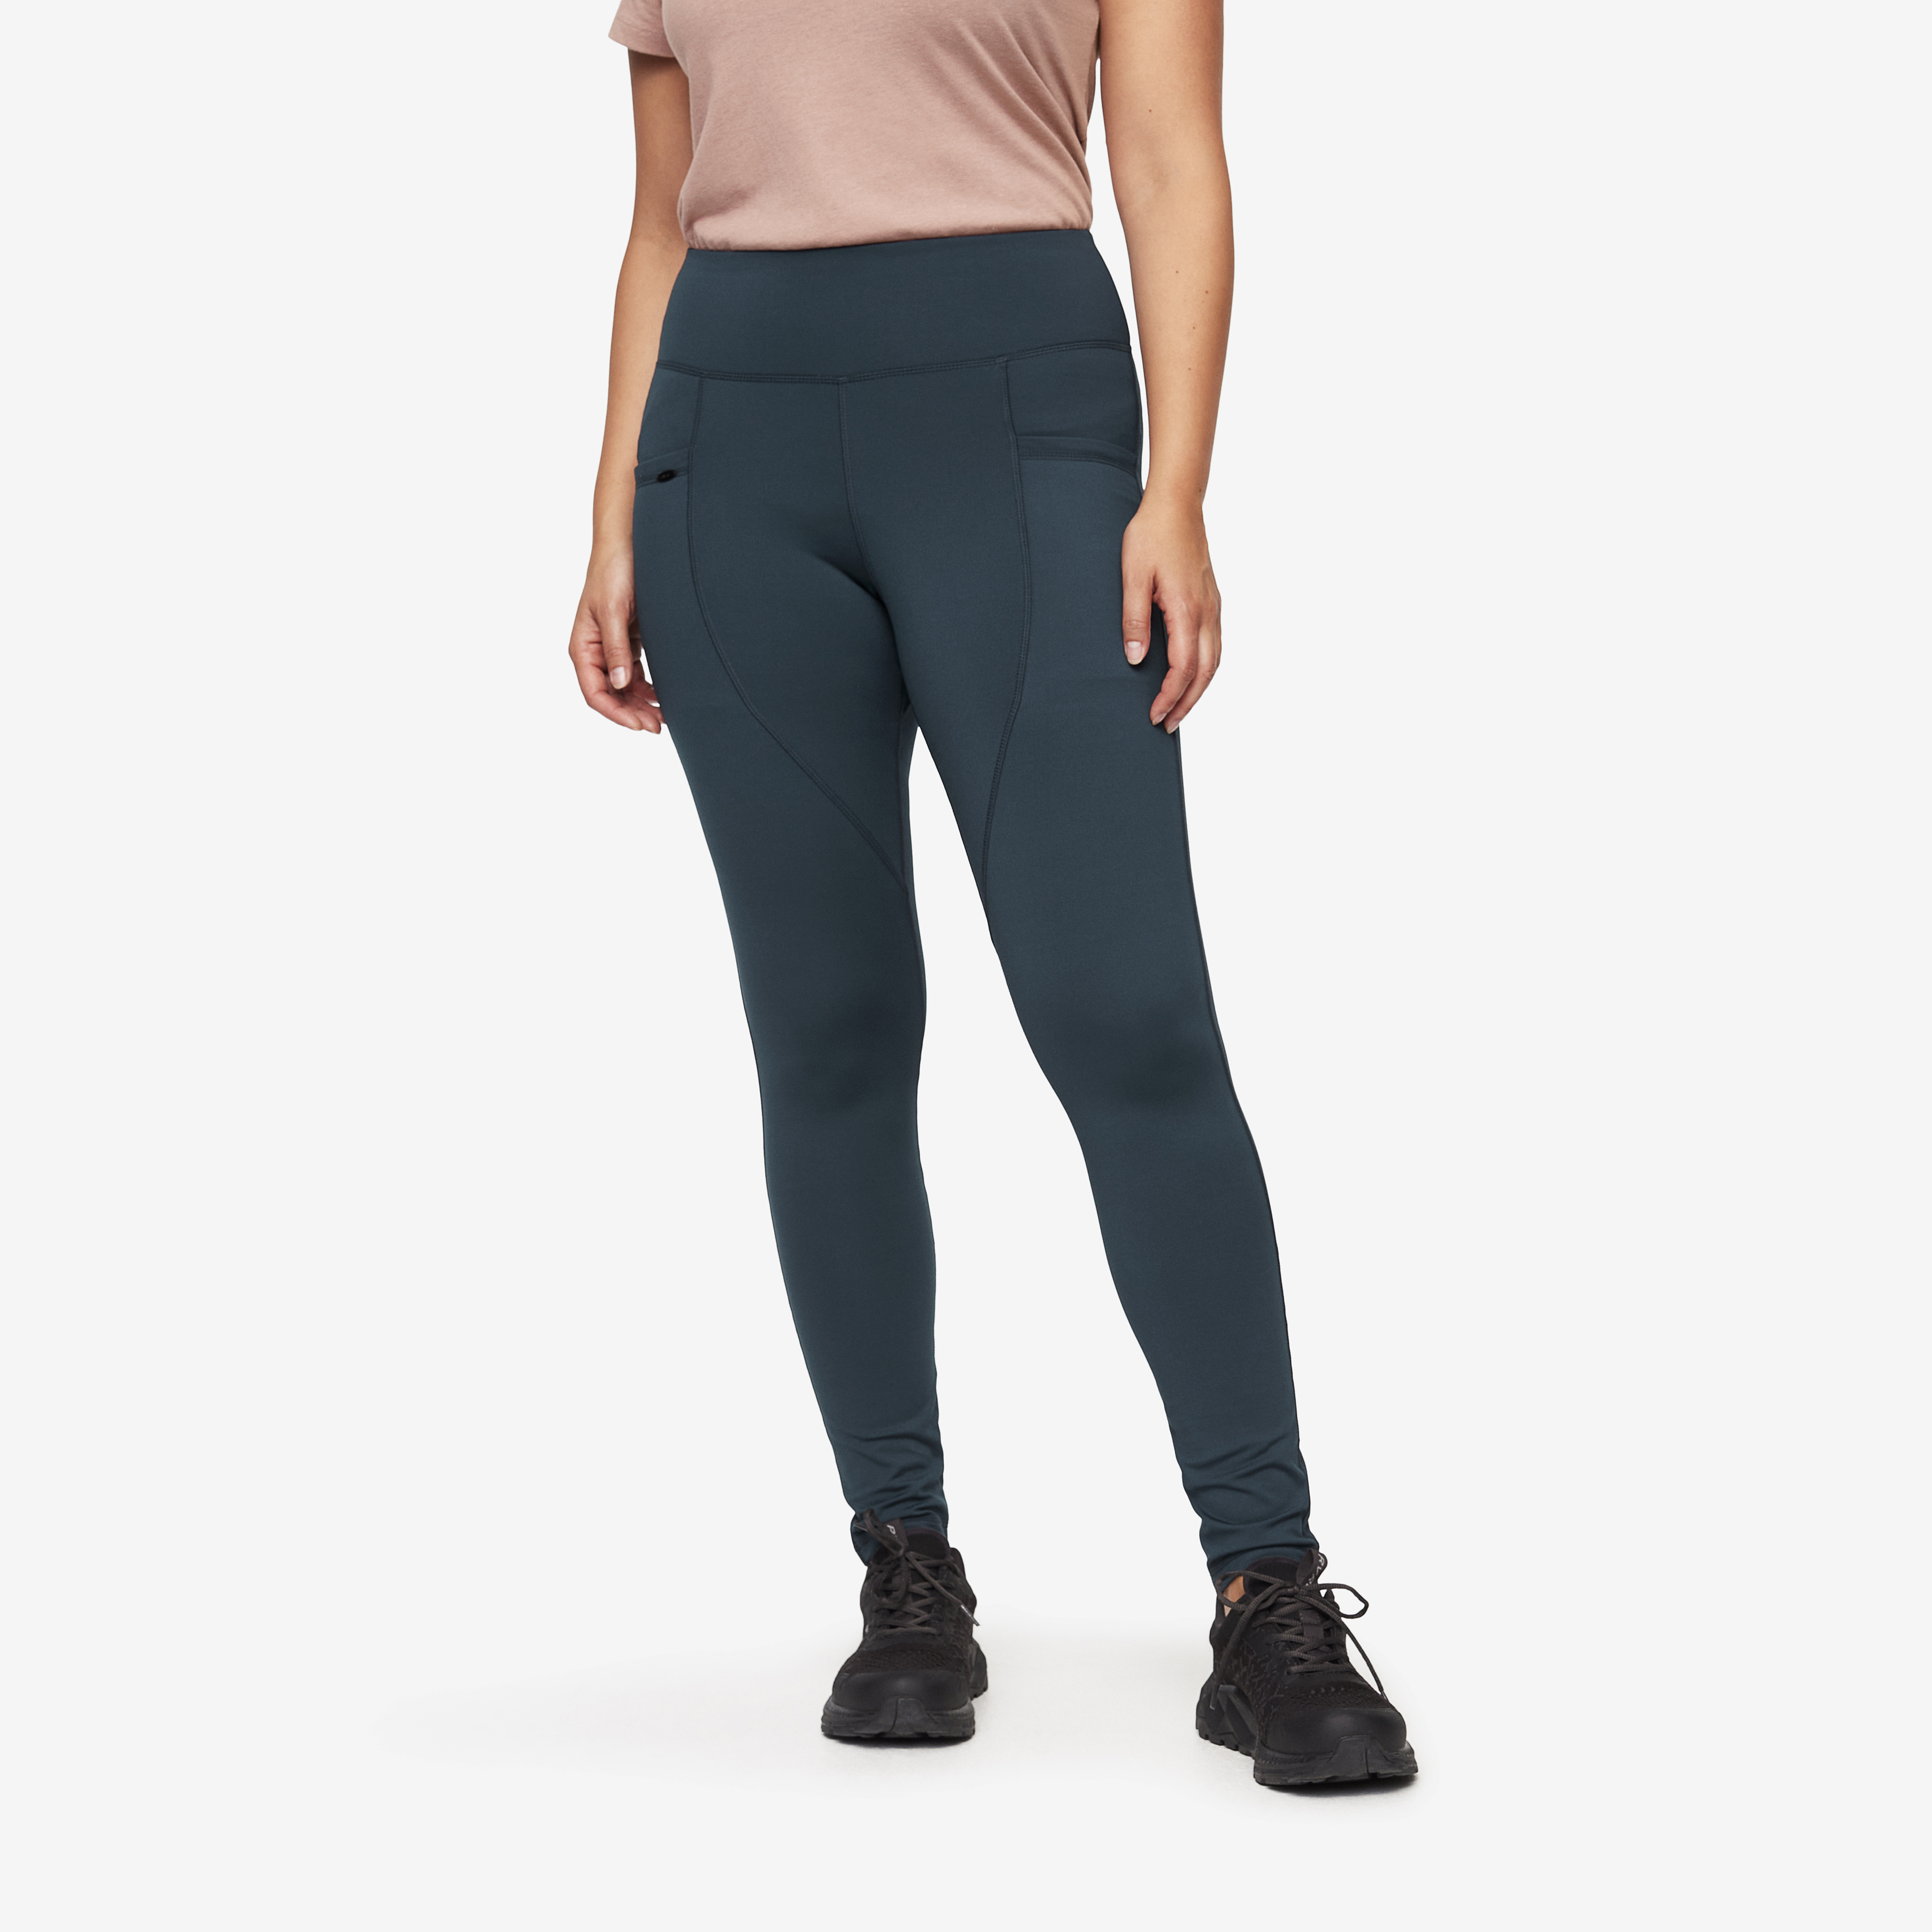 Glacier Fleece Lined Tights Blueberry